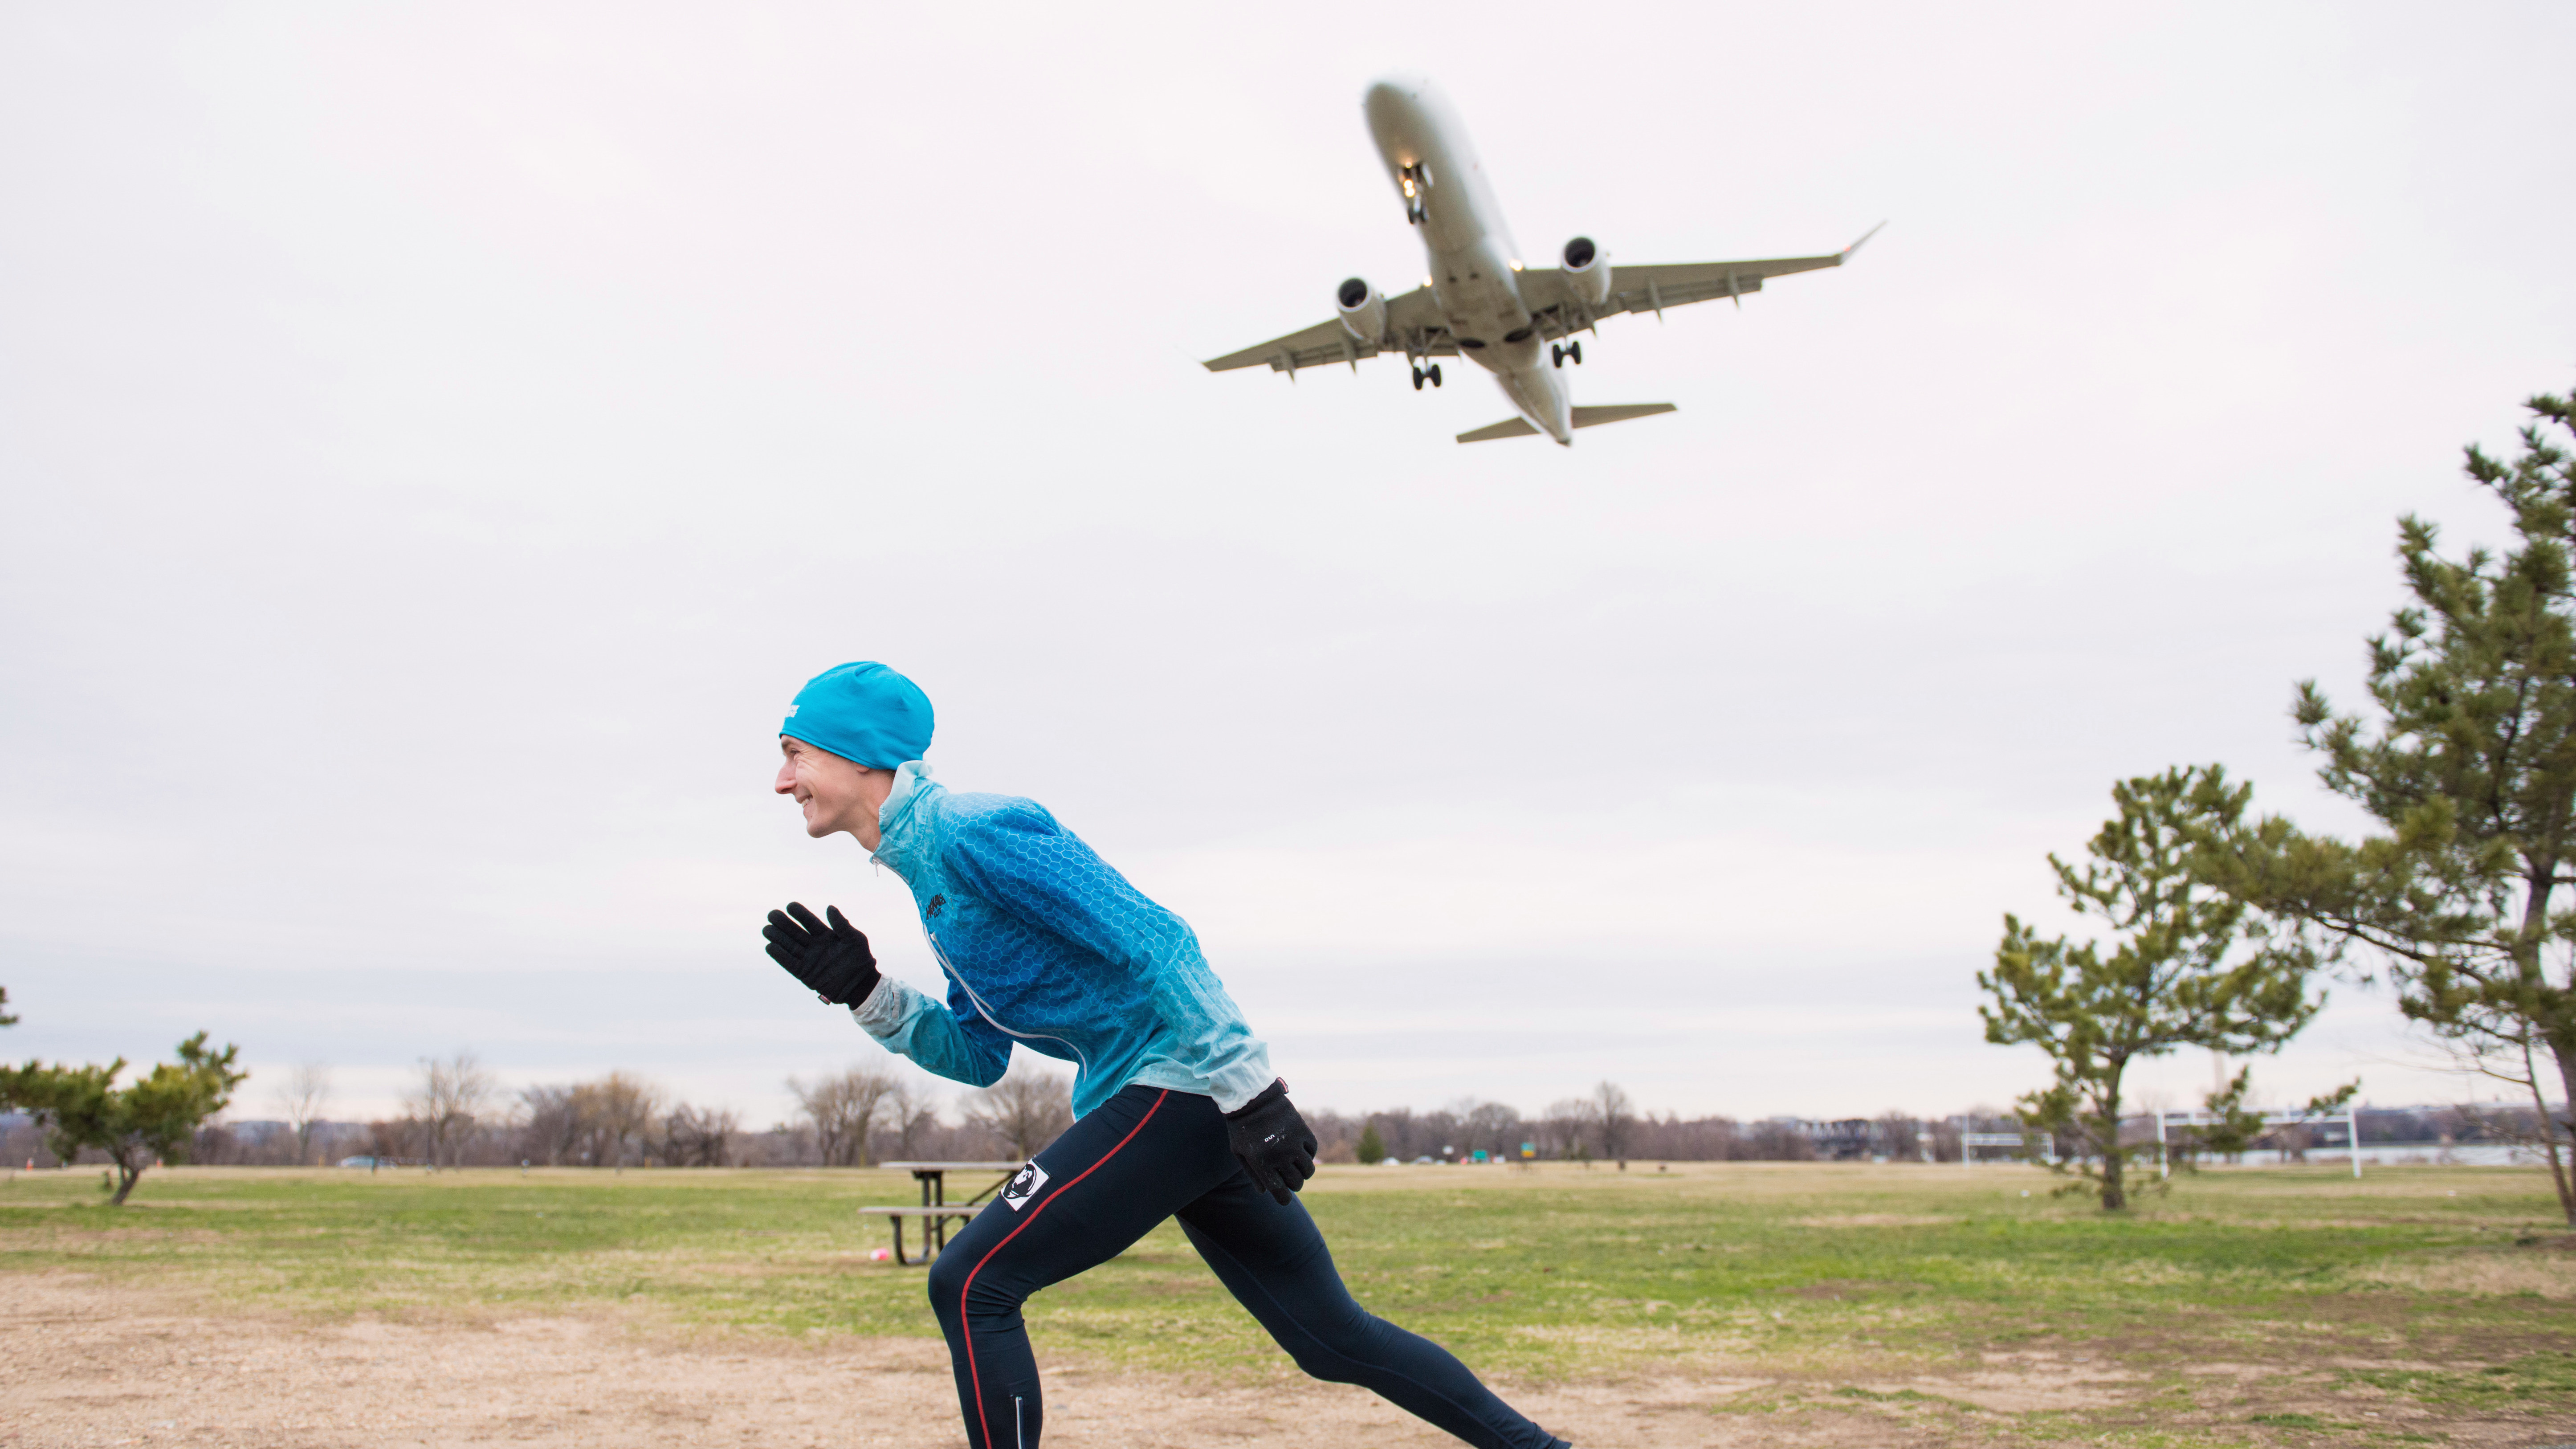 Introductory image: Tyler runs as an airplane takes off